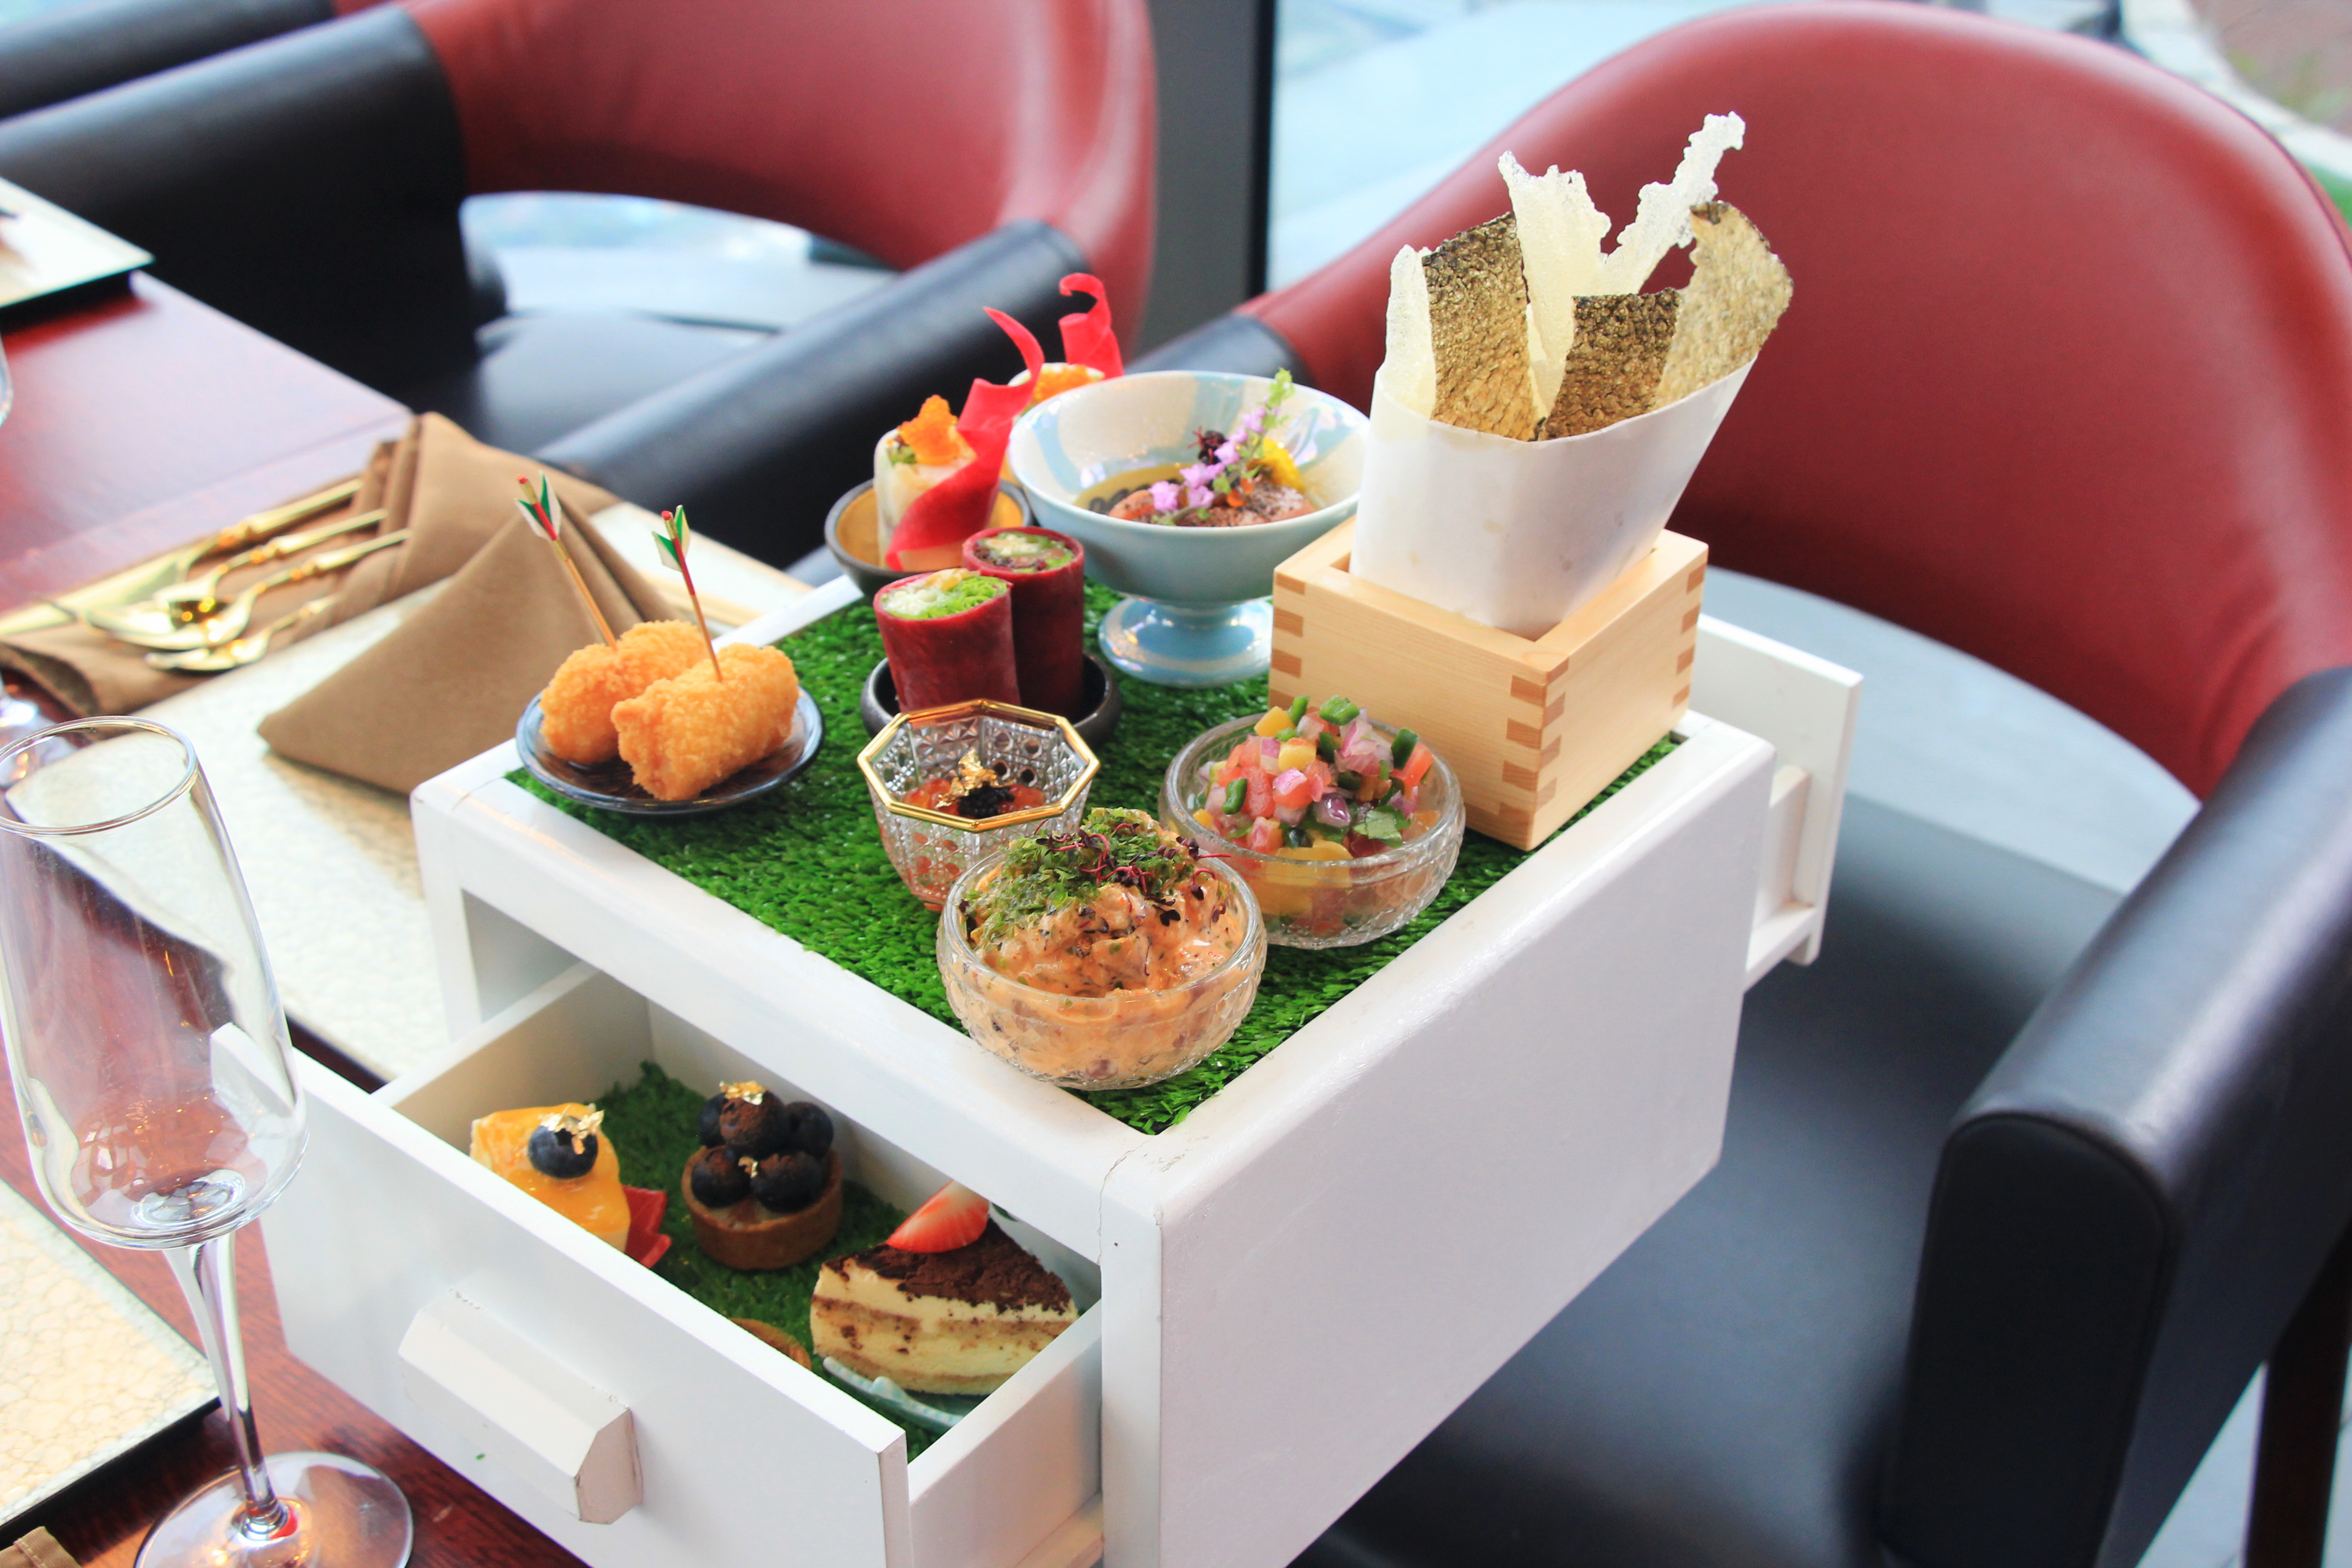 High Tea in The Sky: An afternoon tea in Vietnam’s tallest building